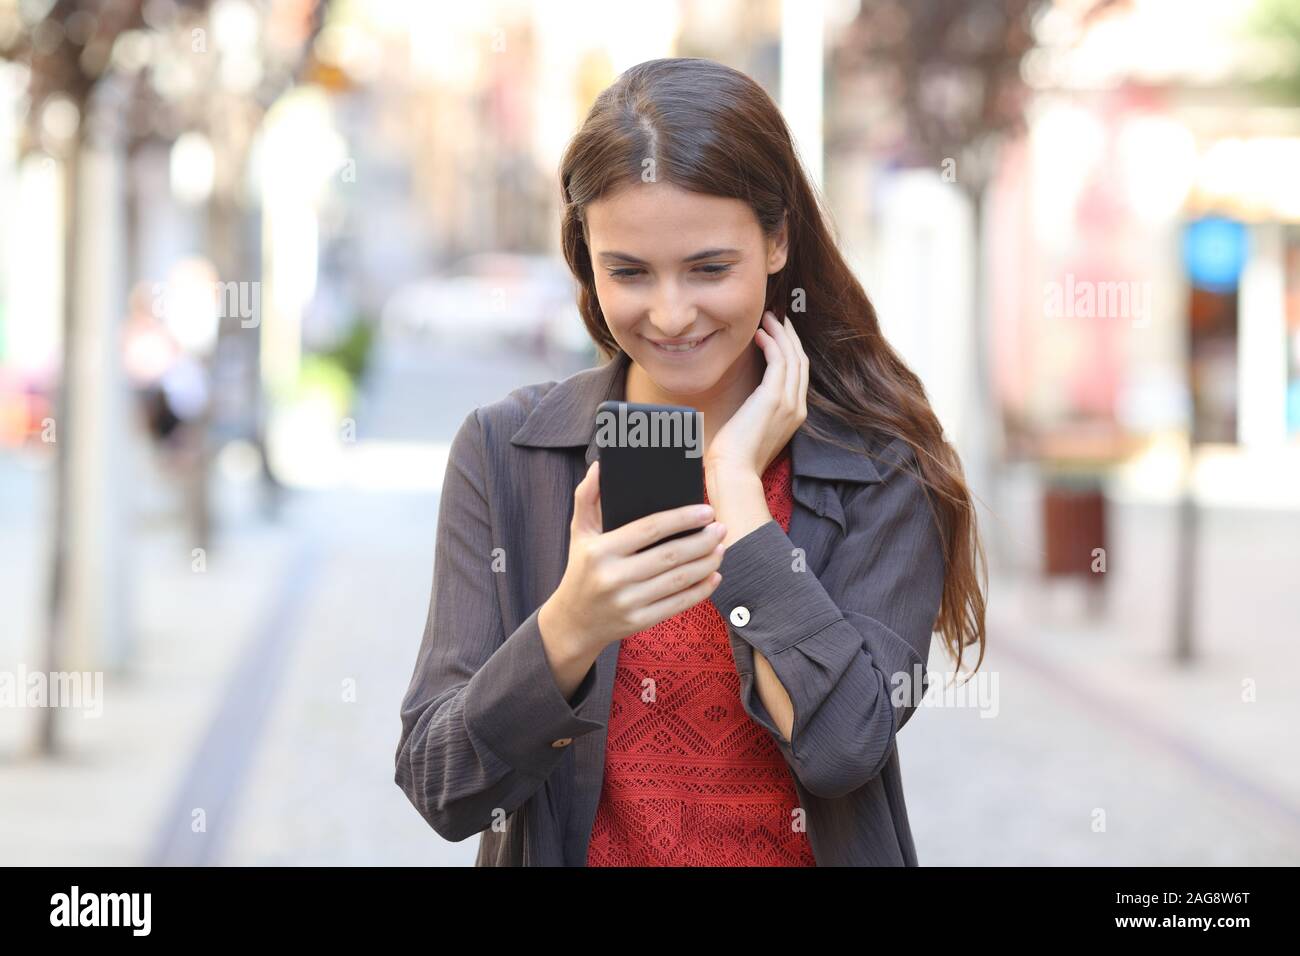 Front view portrait of a candid teen checking smart phone text walking in the street Stock Photo